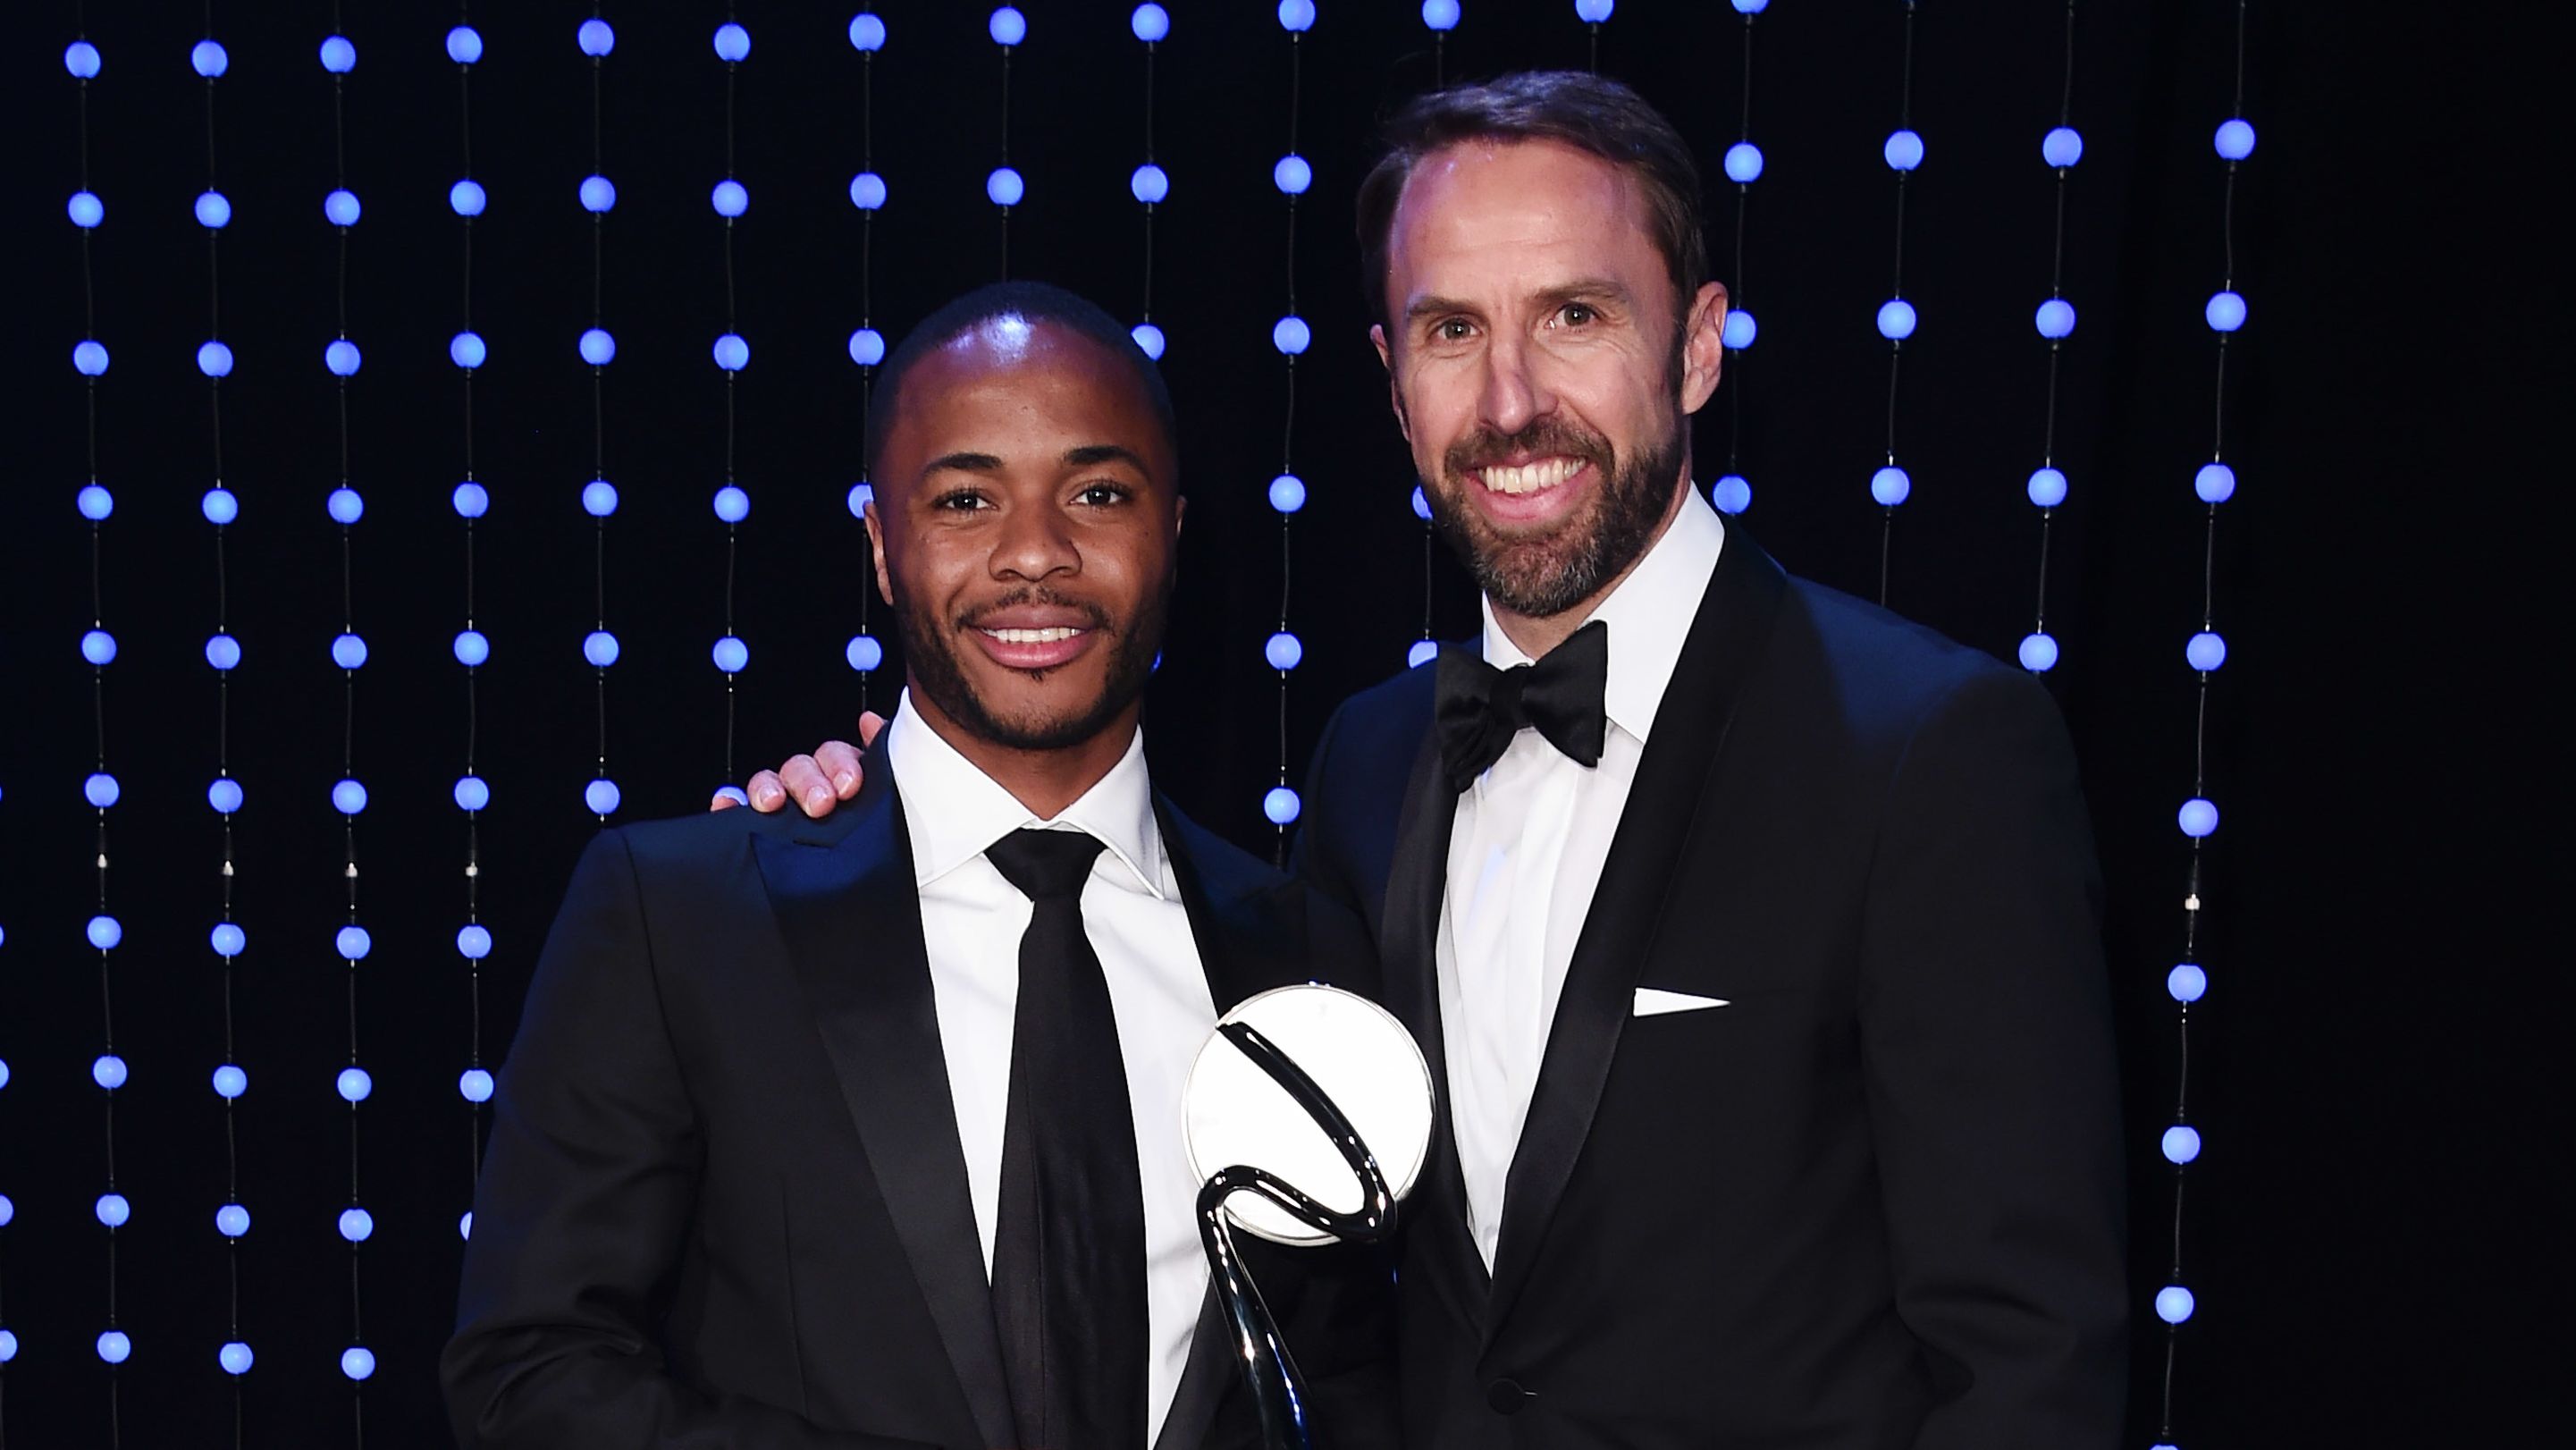 Raheem Sterling poses alongside England manager Gareth Southgate, who handed the winger his special award.